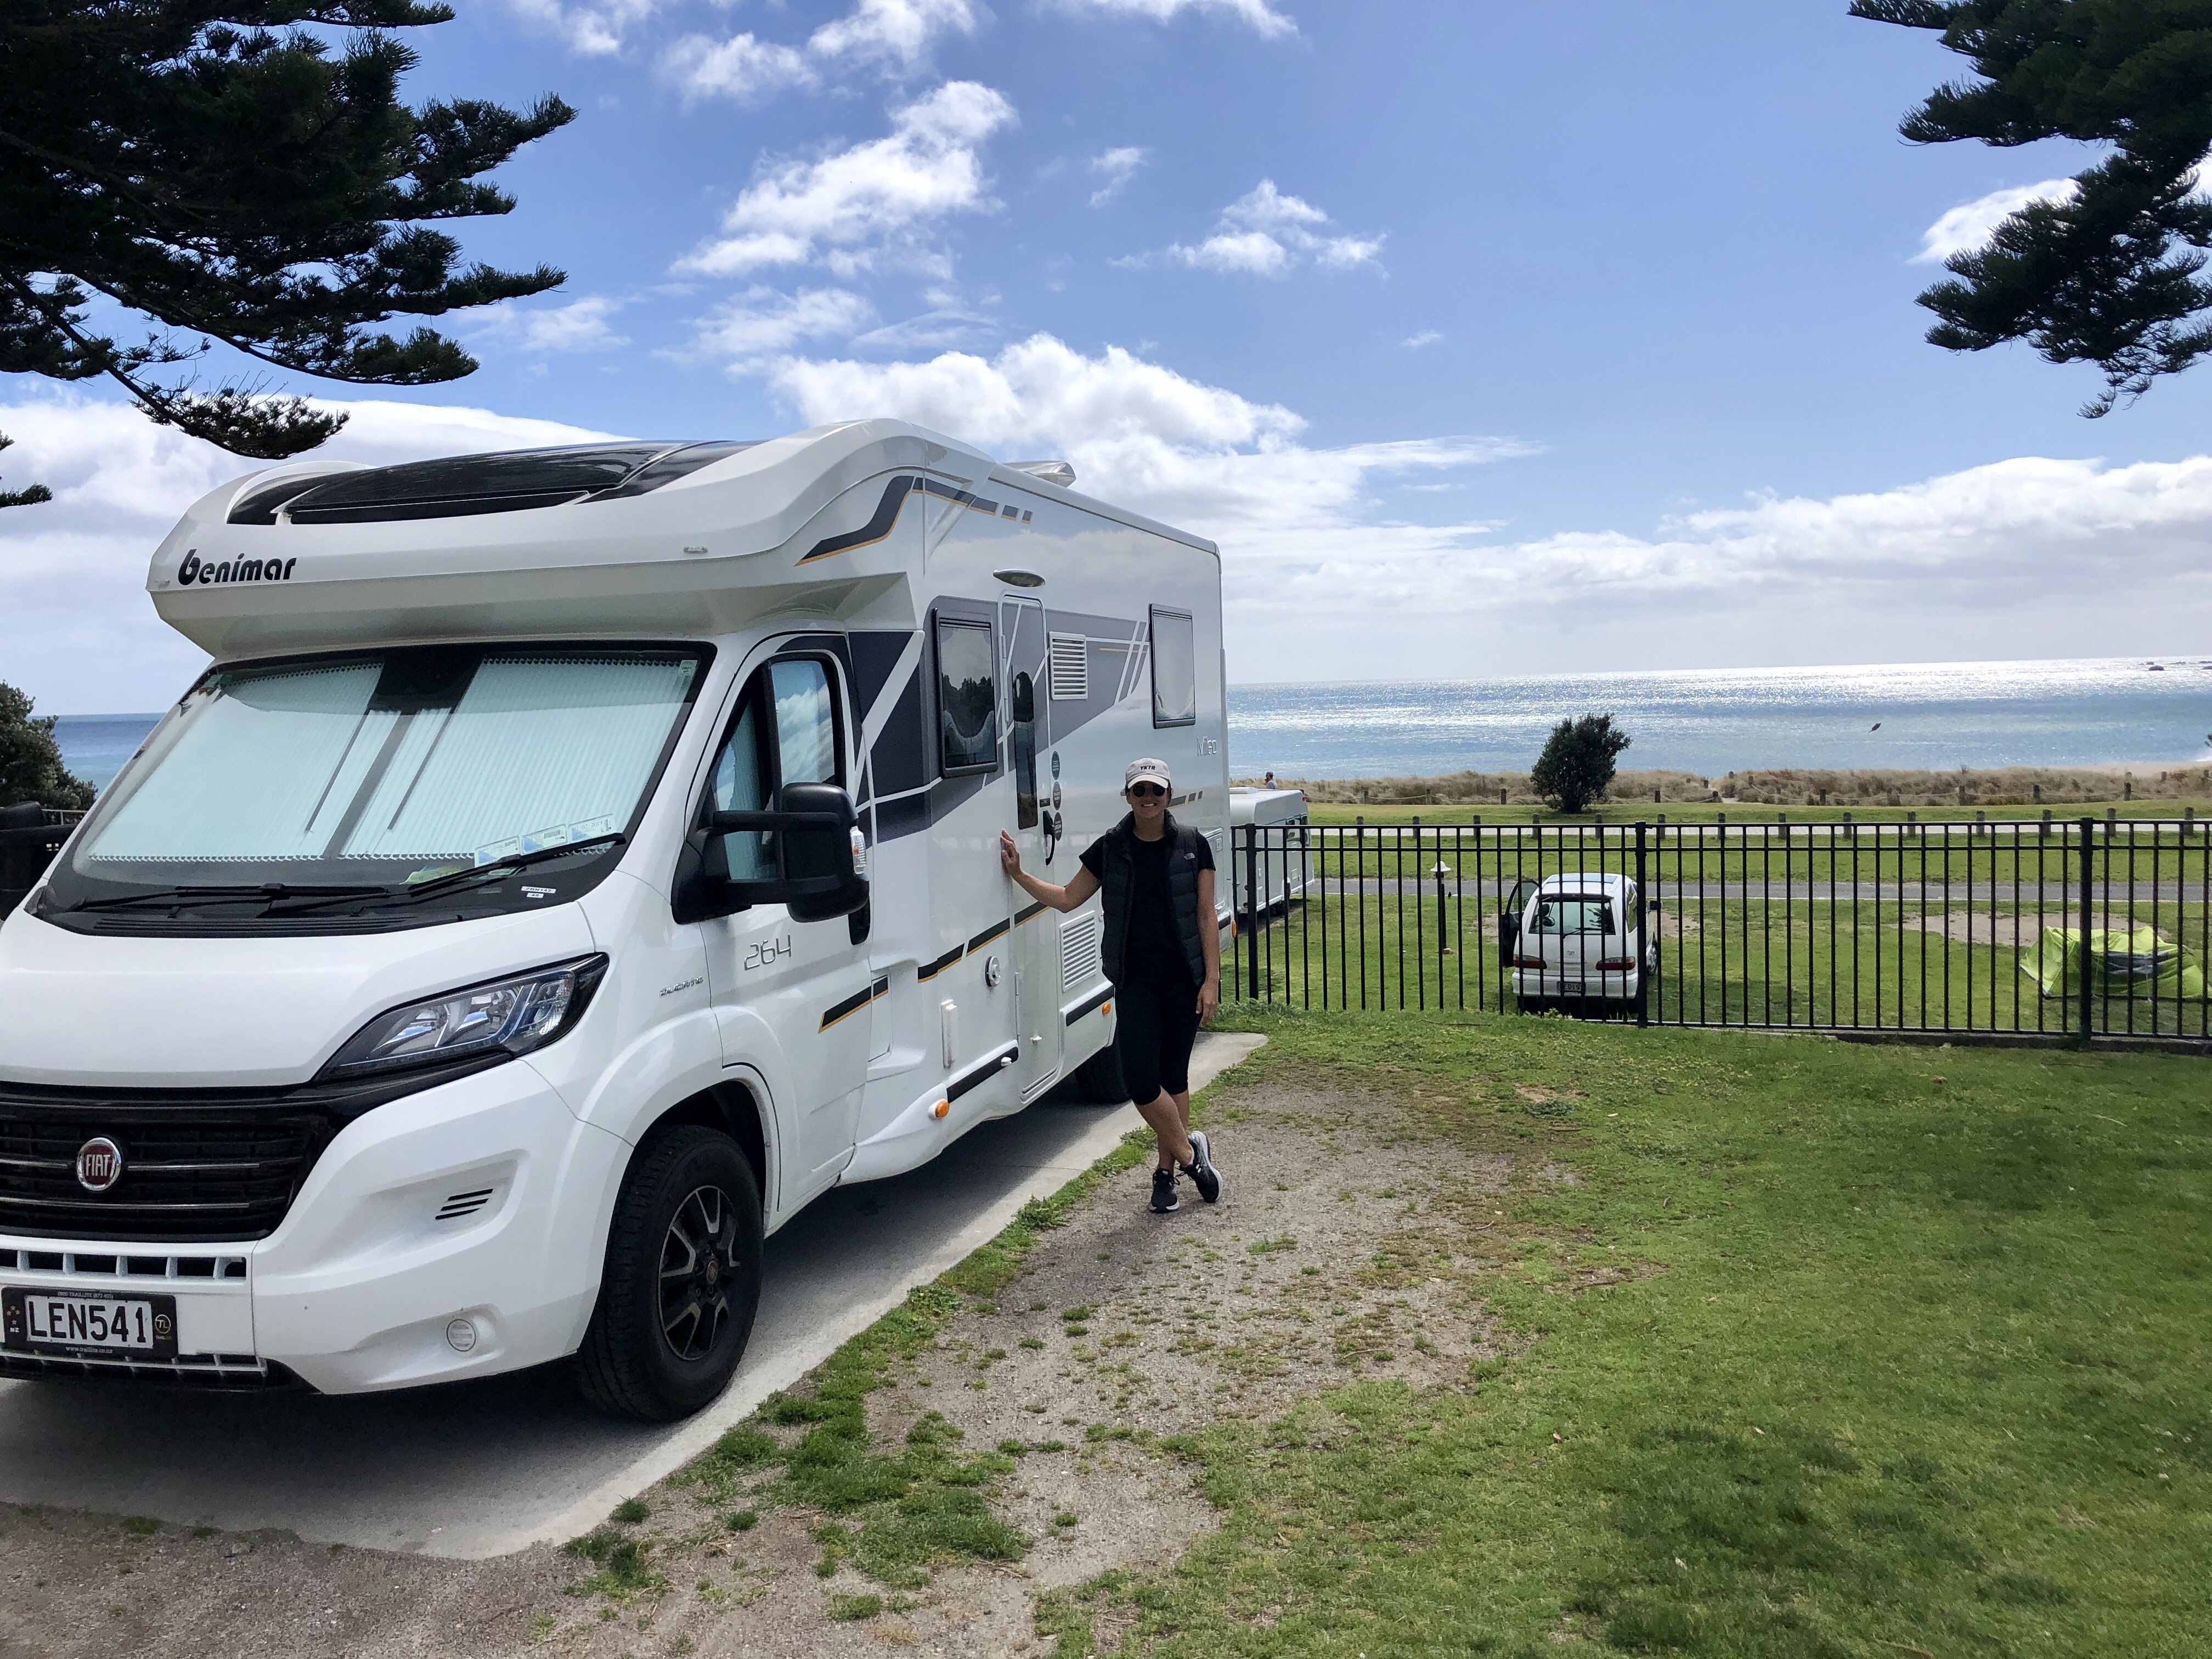 A first time trip for a motorhome newbie